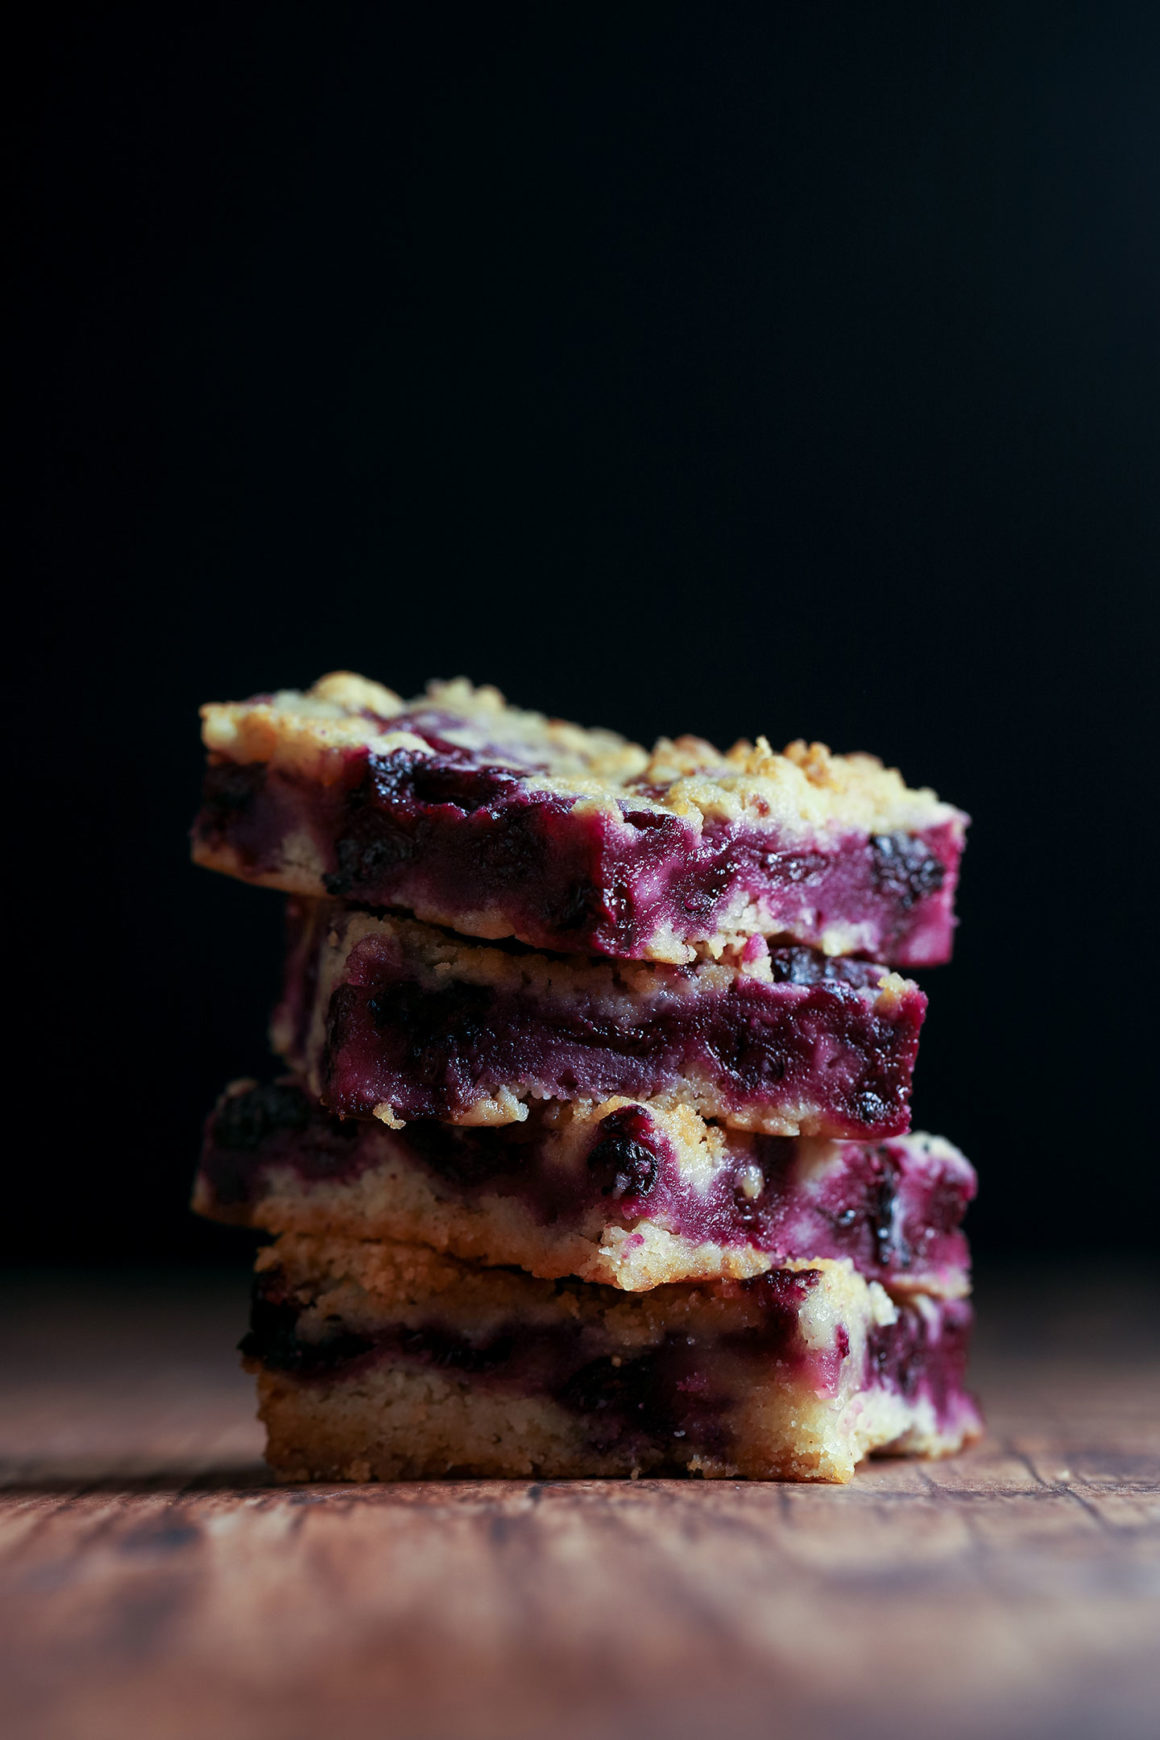 Stack of Blueberry Crumble Dessert Bars